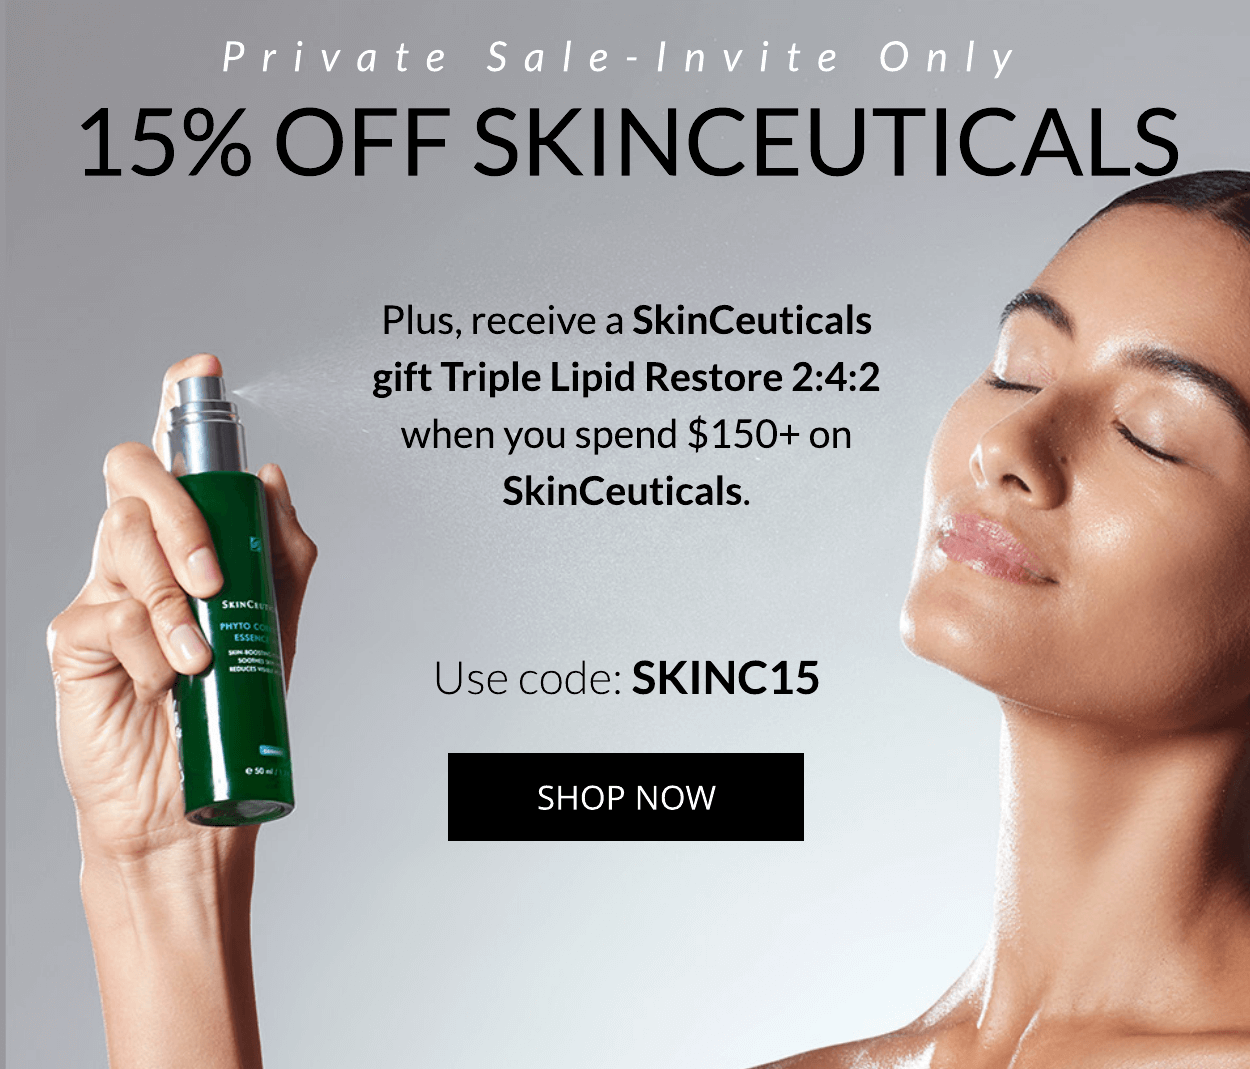 15% OFF SKINCEUTICALS Plus, receive a SkinCeuticals "' gift Triple Lipid Restore 2:4:2 Ce when you spend $150 on SkinCeuticals. Use code: SKINC15 Saela el 